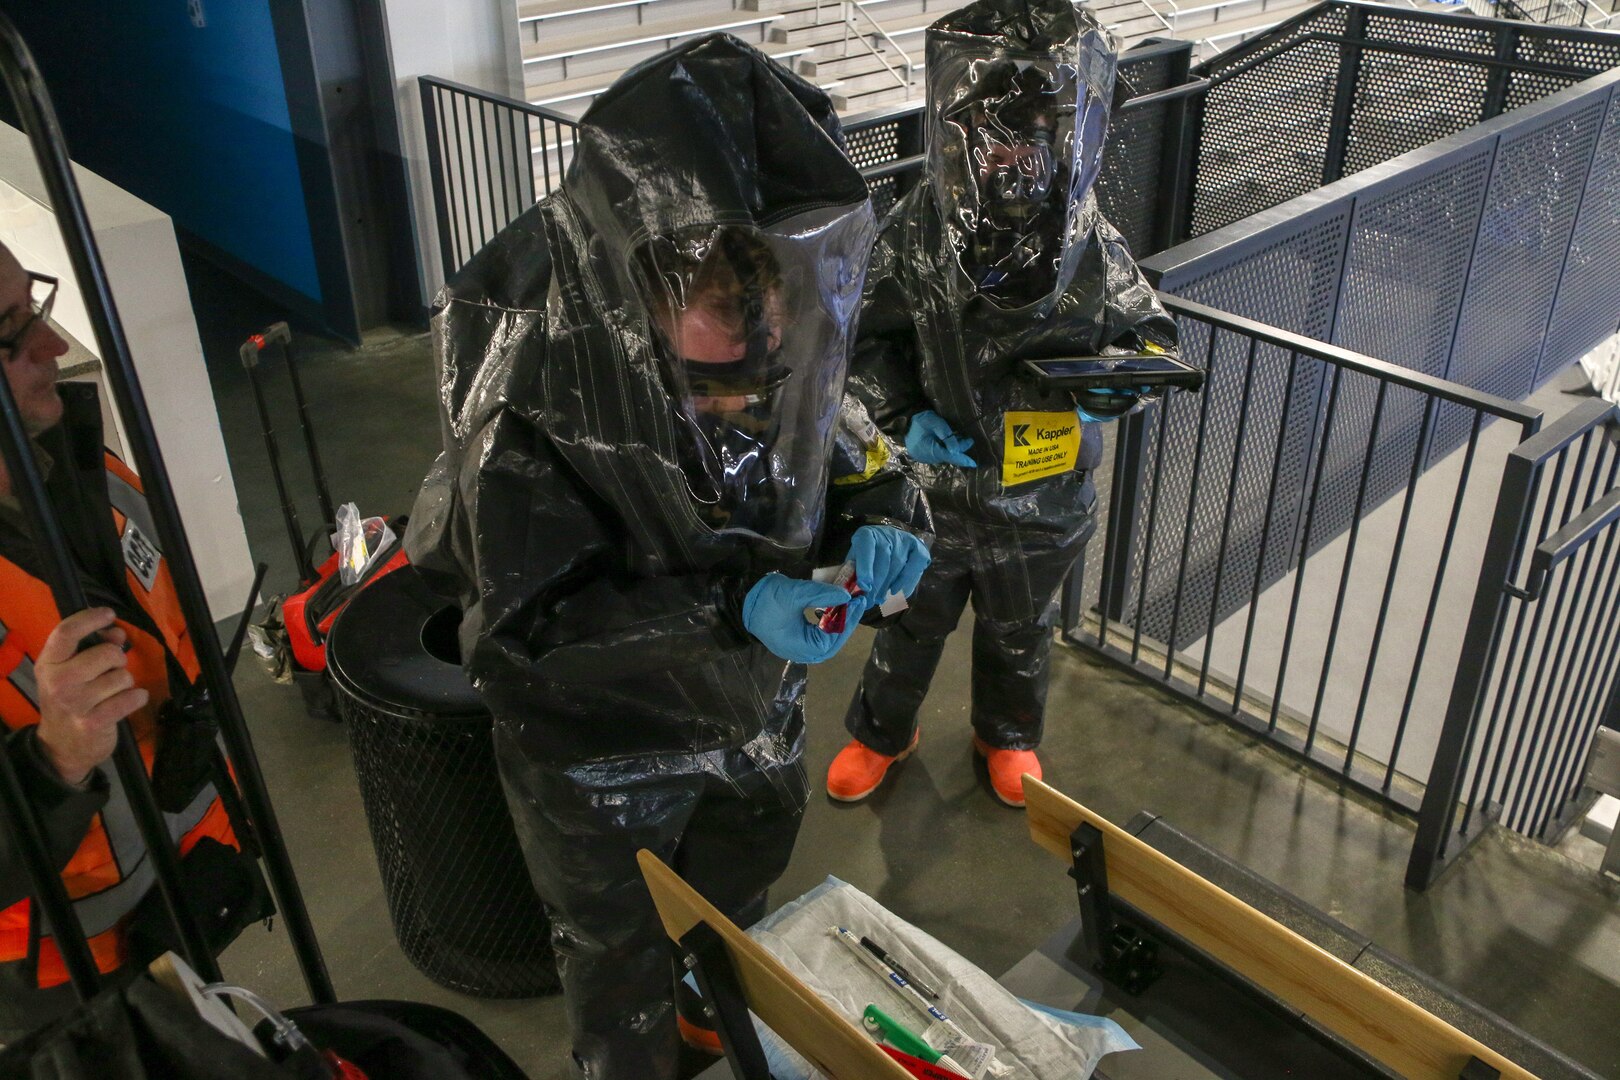 Virginia National Guard Soldiers and Airmen assigned to the Fort Pickett-based 34th Civil Support Team participate in collective lanes training Jan. 26, 2023, at the Virginia Beach Sports Center in Virginia Beach, Virginia. The 34th CST supports first responders during potential hazardous materials incidents.